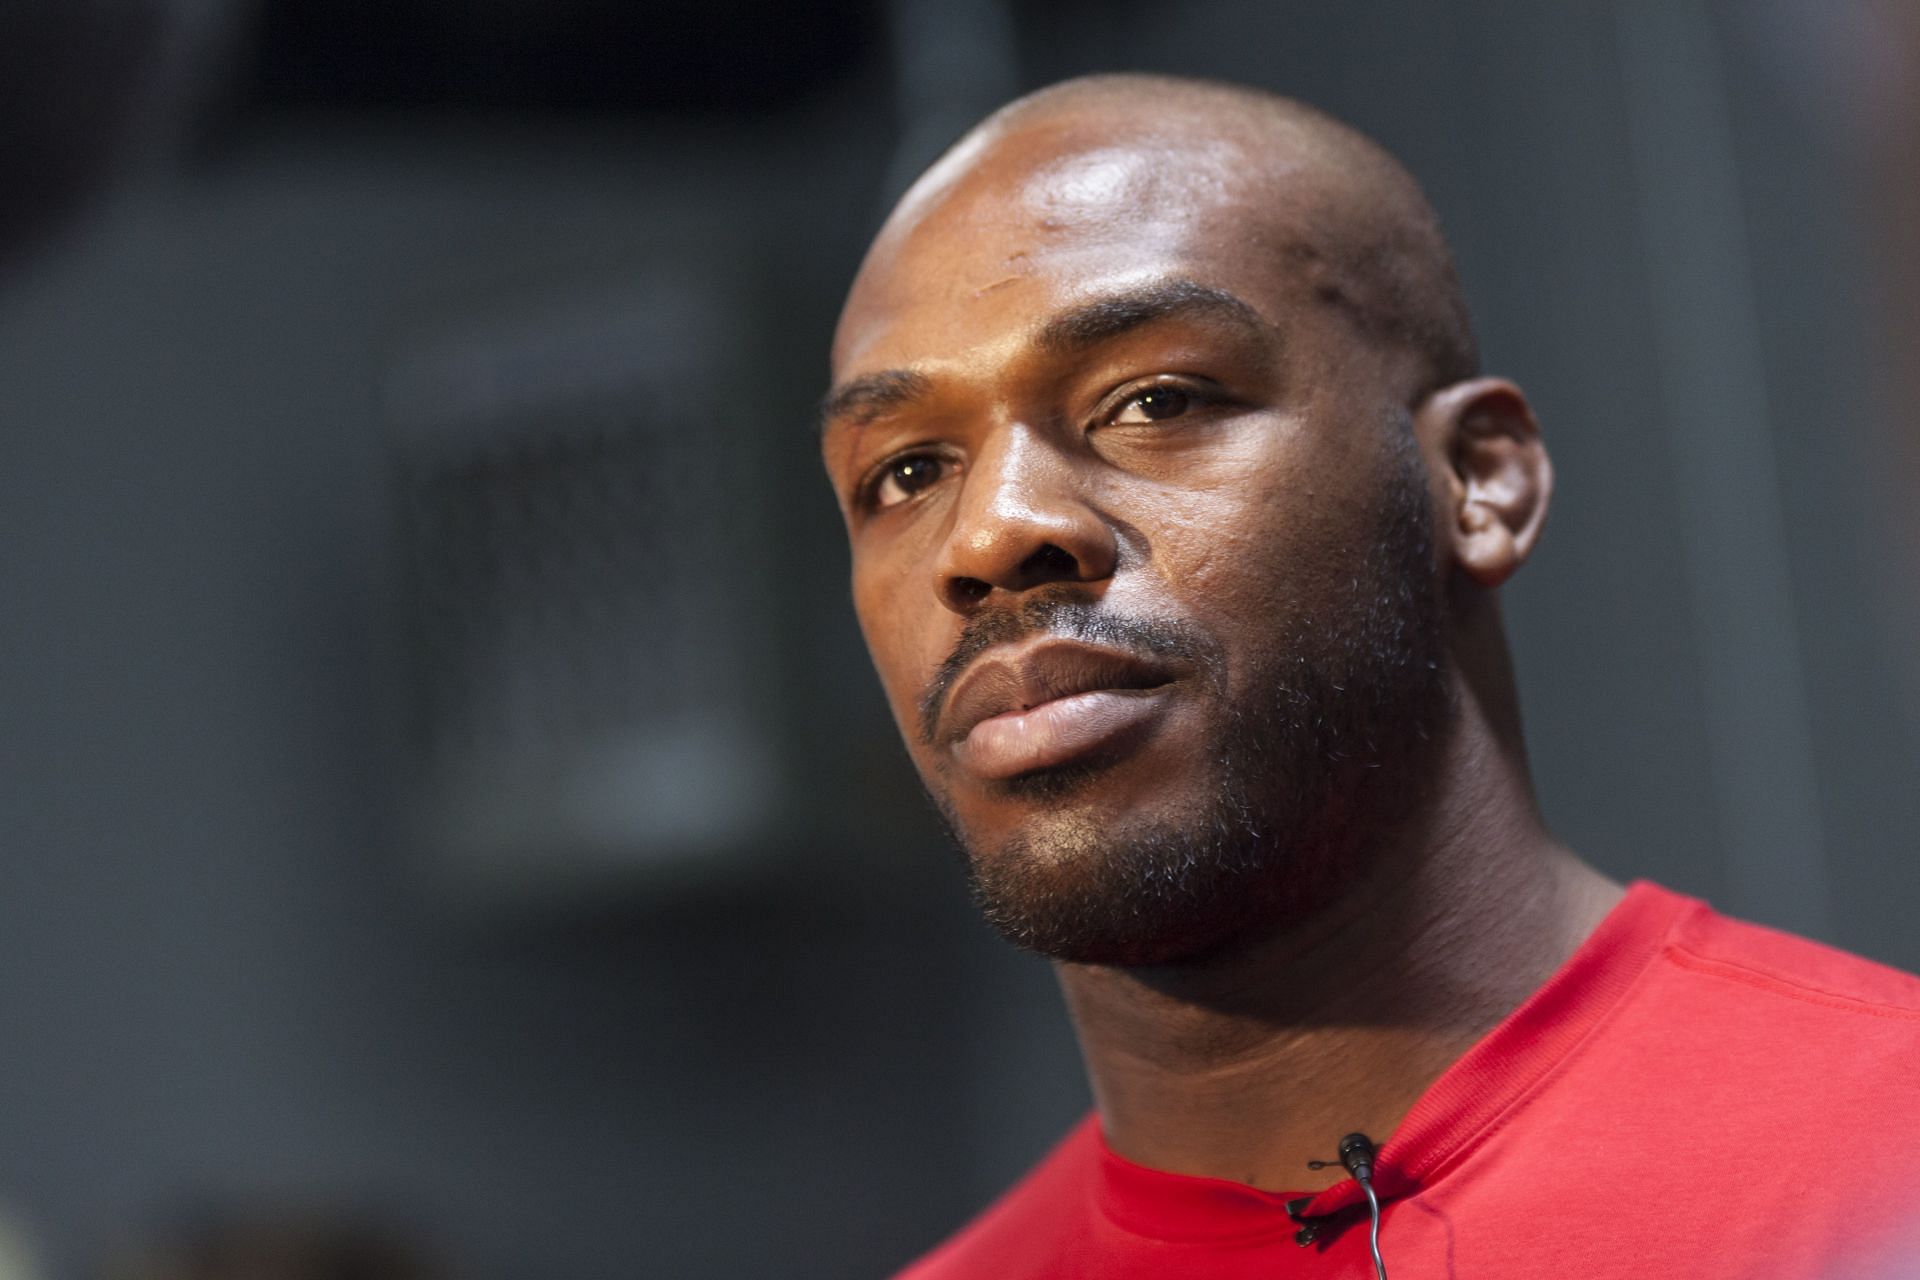 Jon Jones could&#039;ve been renowned as the greatest fighter in UFC history had he stayed clean